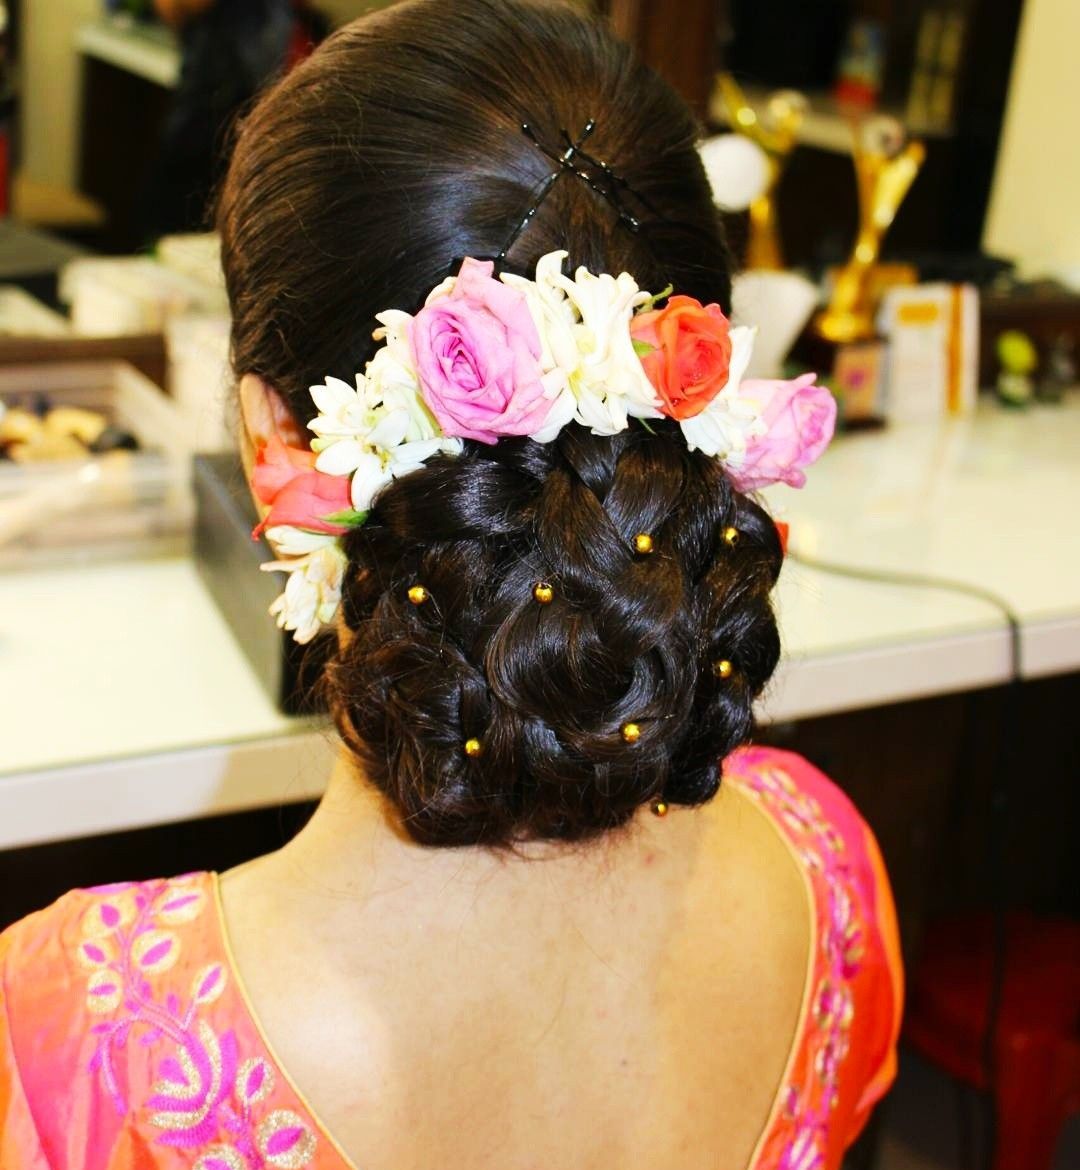 Image may contain one or more people and closeup  Wedding bun hairstyles  Indian bridal hairstyles Bridal hair buns